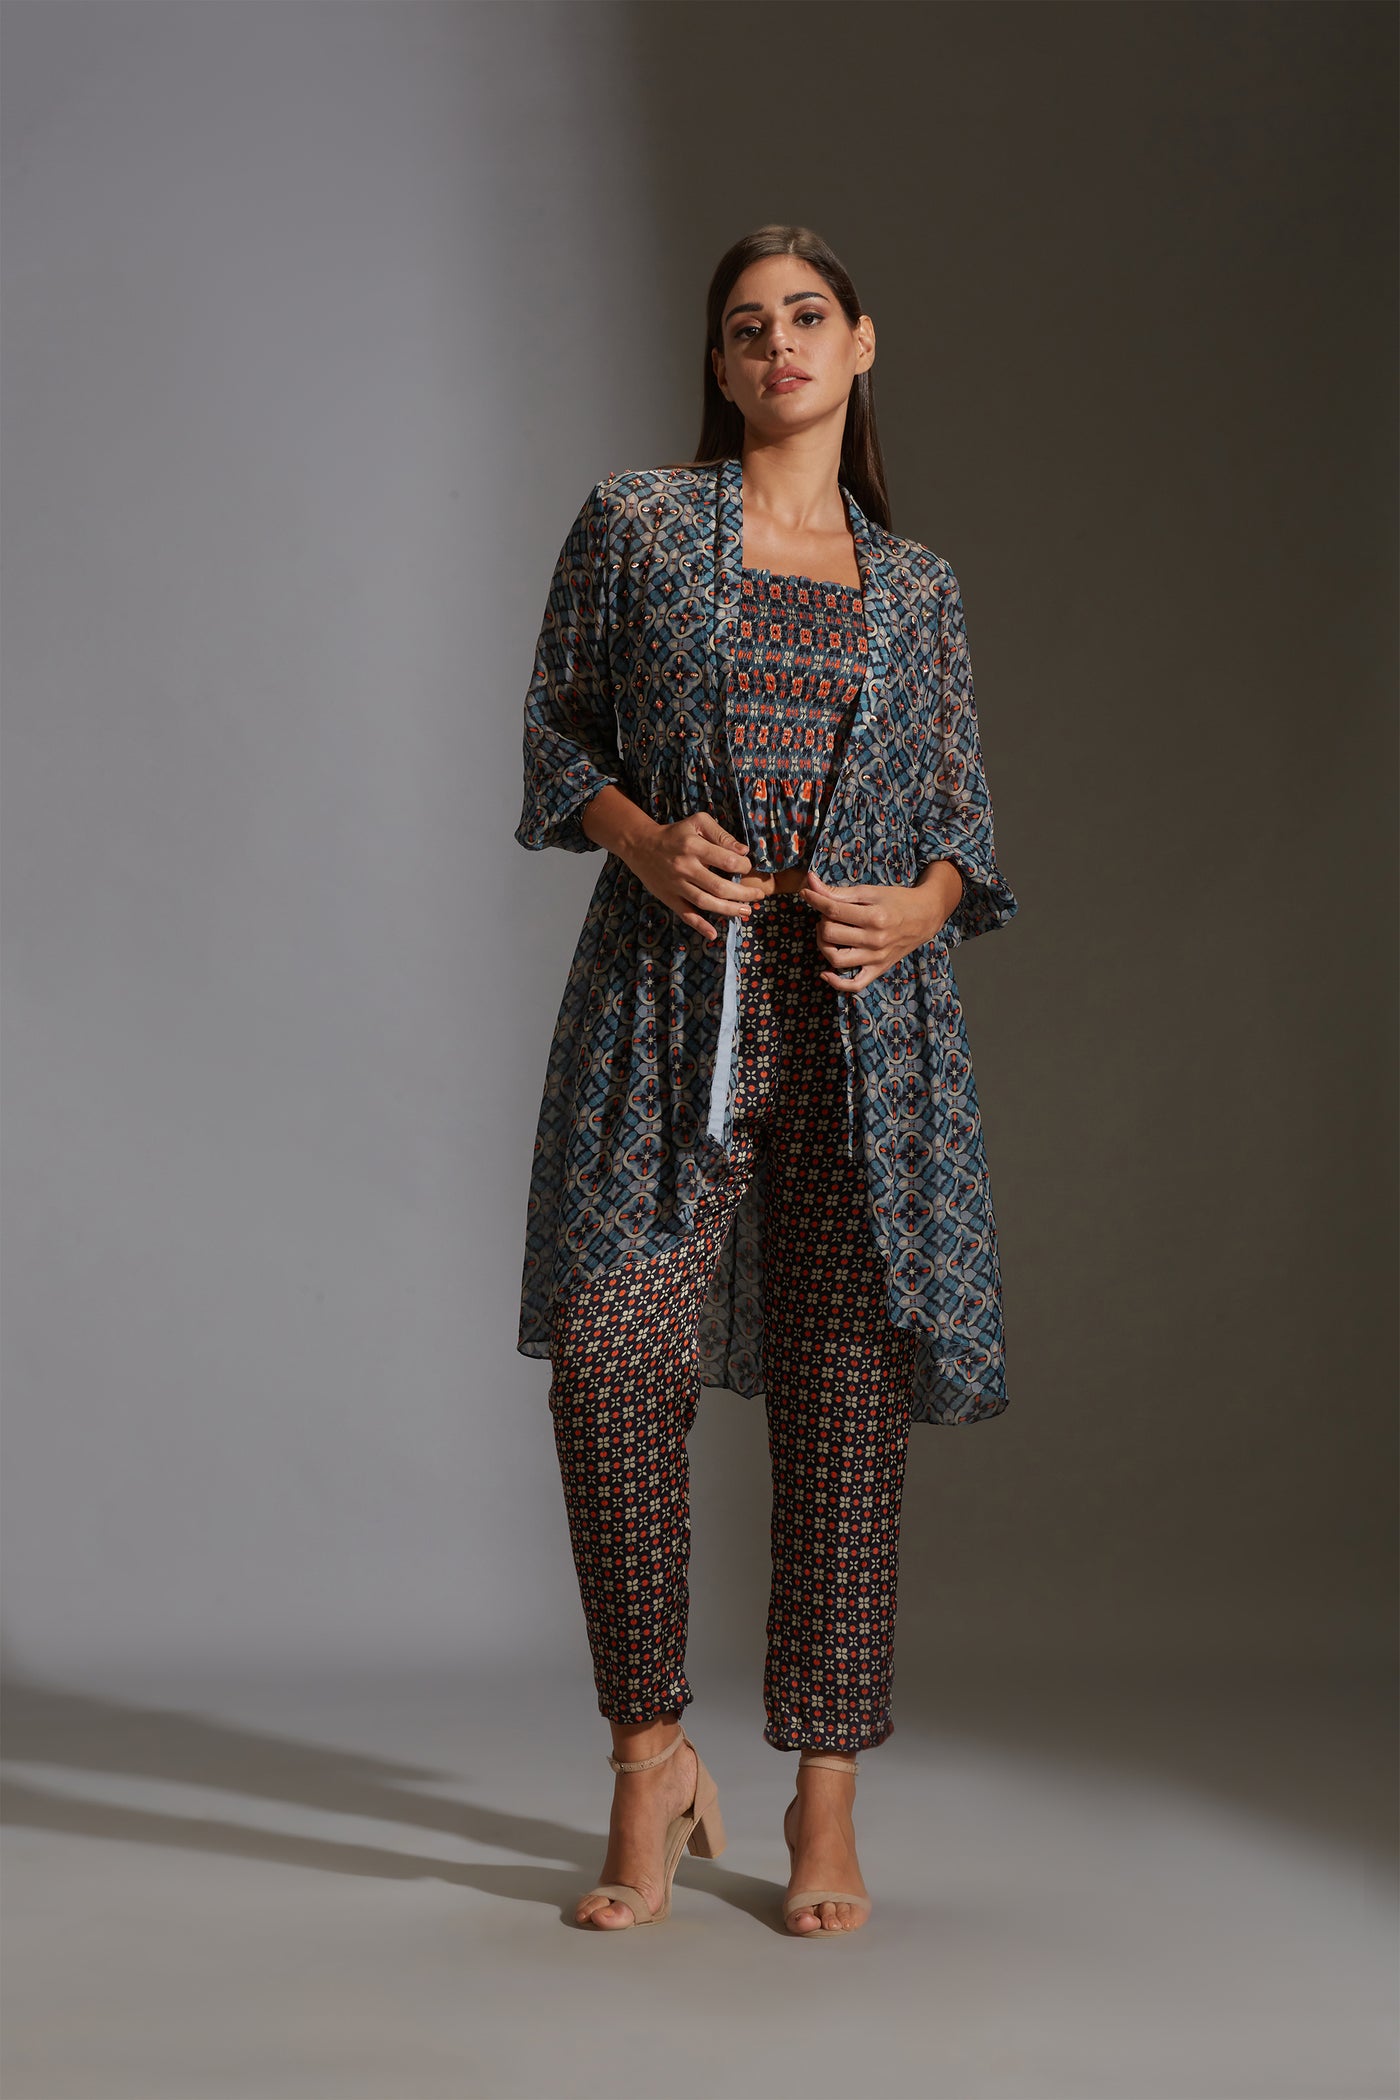 sougat paul Printed rushed top paired with narrow bottom pants and printed chiffon jacket blue fusion indian designer wear online shopping melange singapore